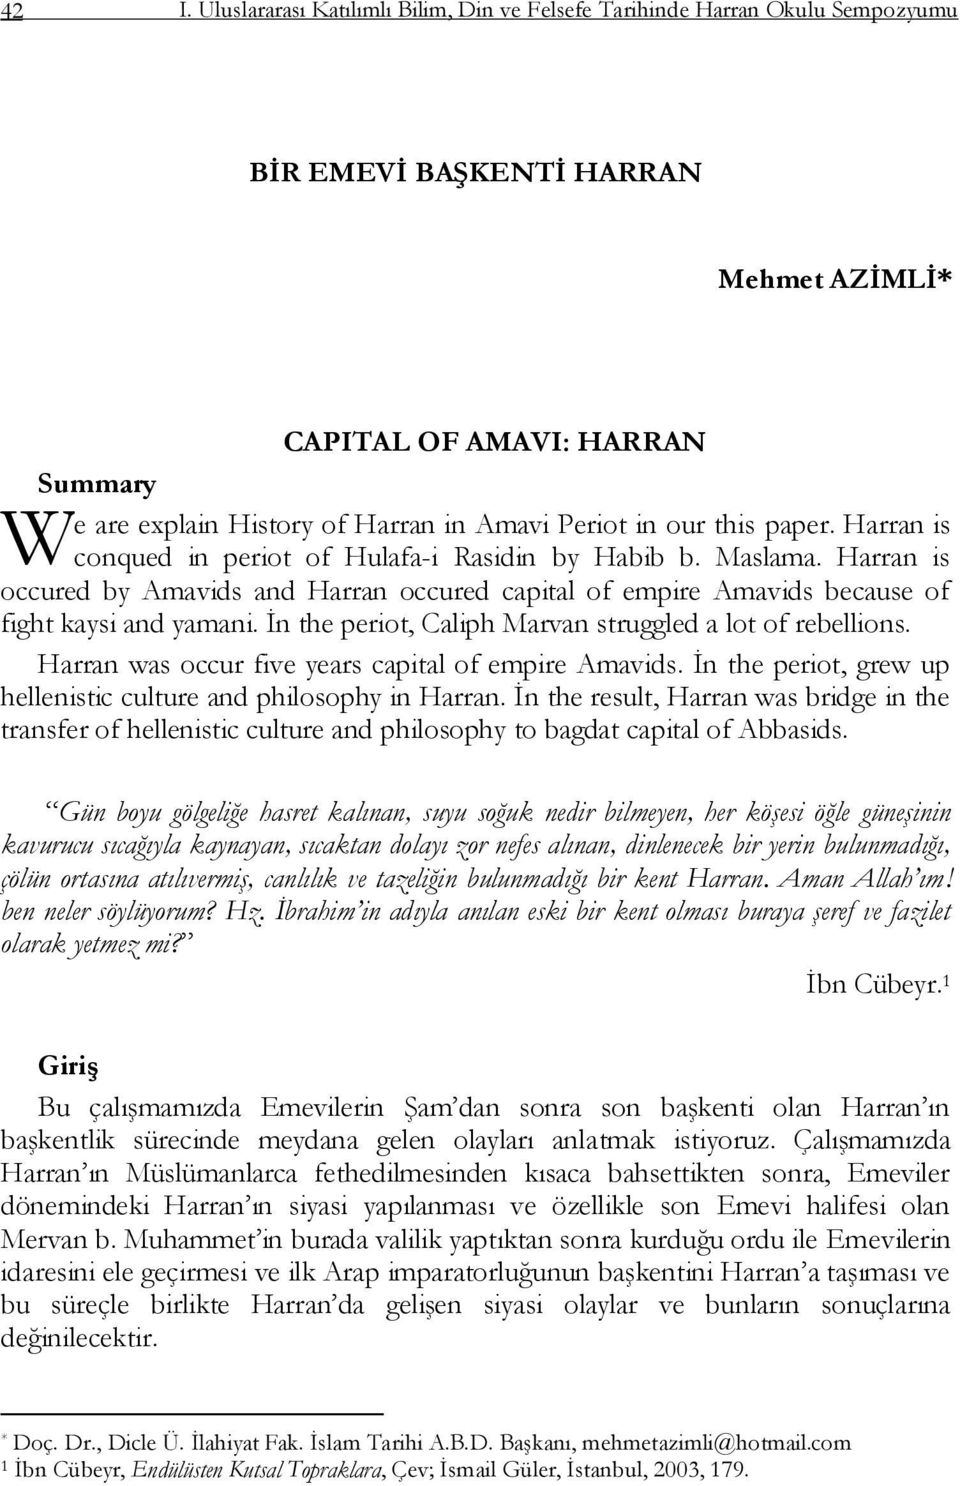 Harran is occured by Amavids and Harran occured capital of empire Amavids because of fight kaysi and yamani. Ġn the periot, Caliph Marvan struggled a lot of rebellions.